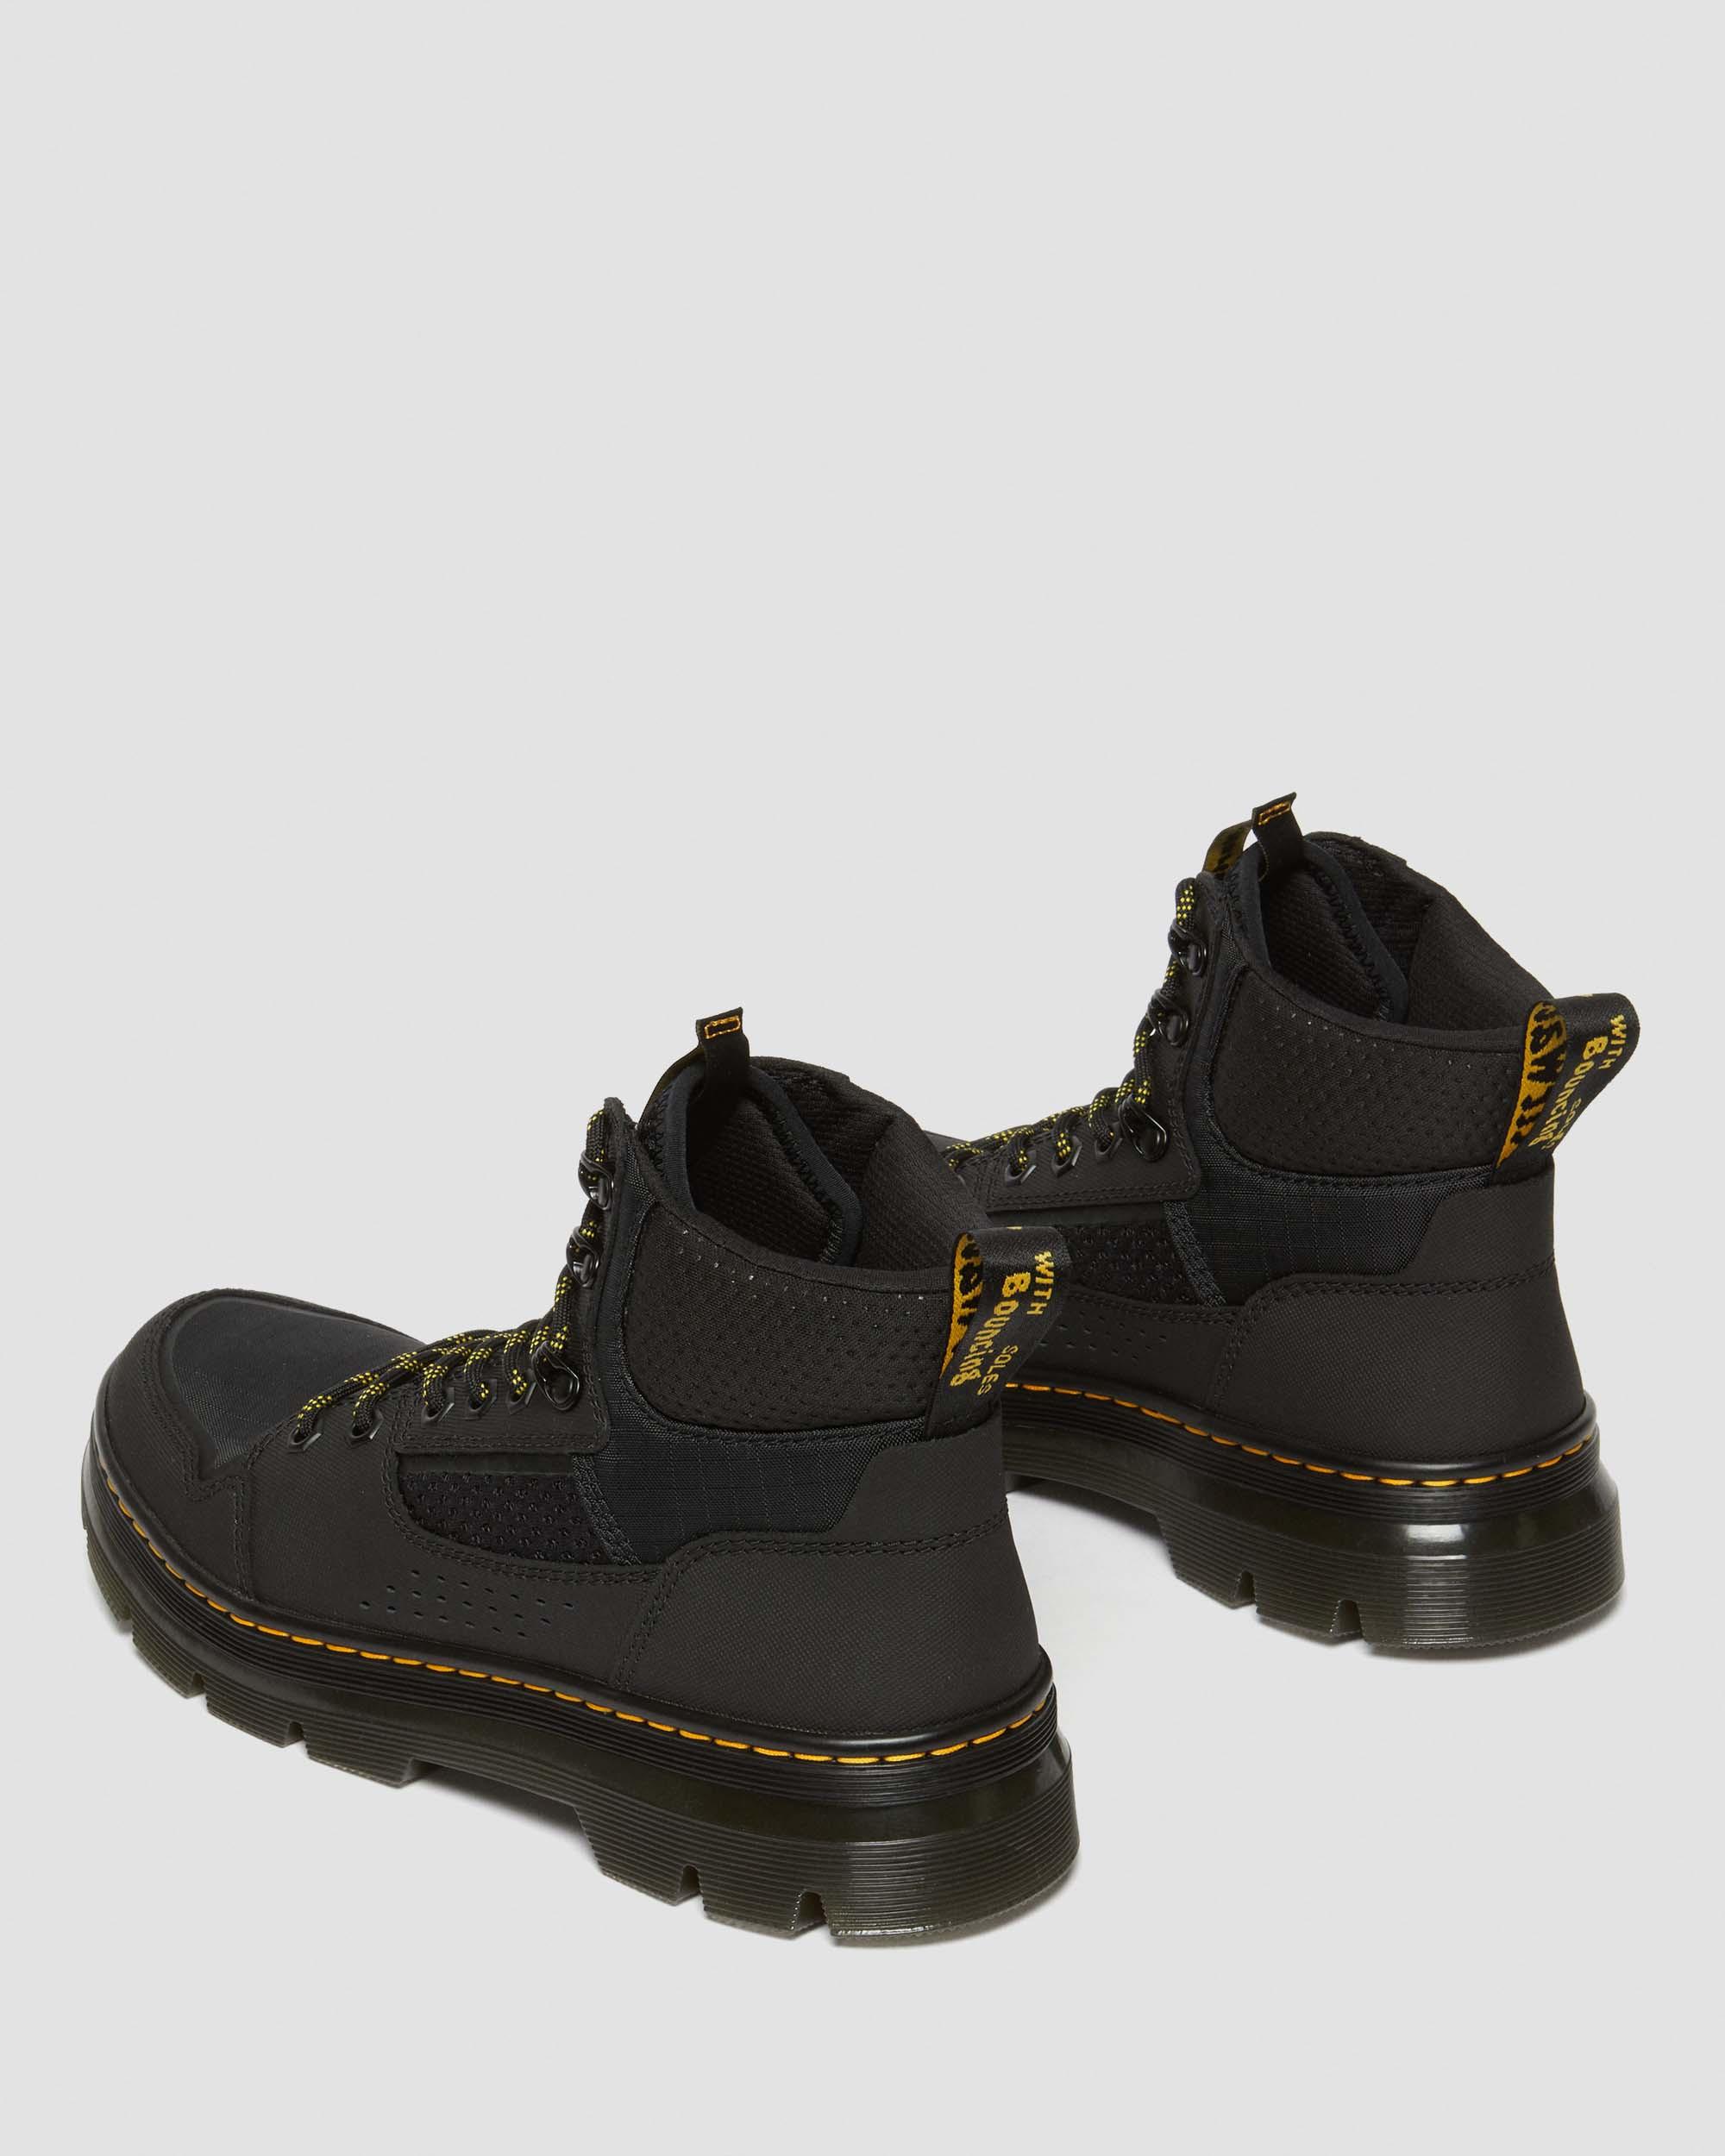 Rilla Lace Up Utility Boots in Black